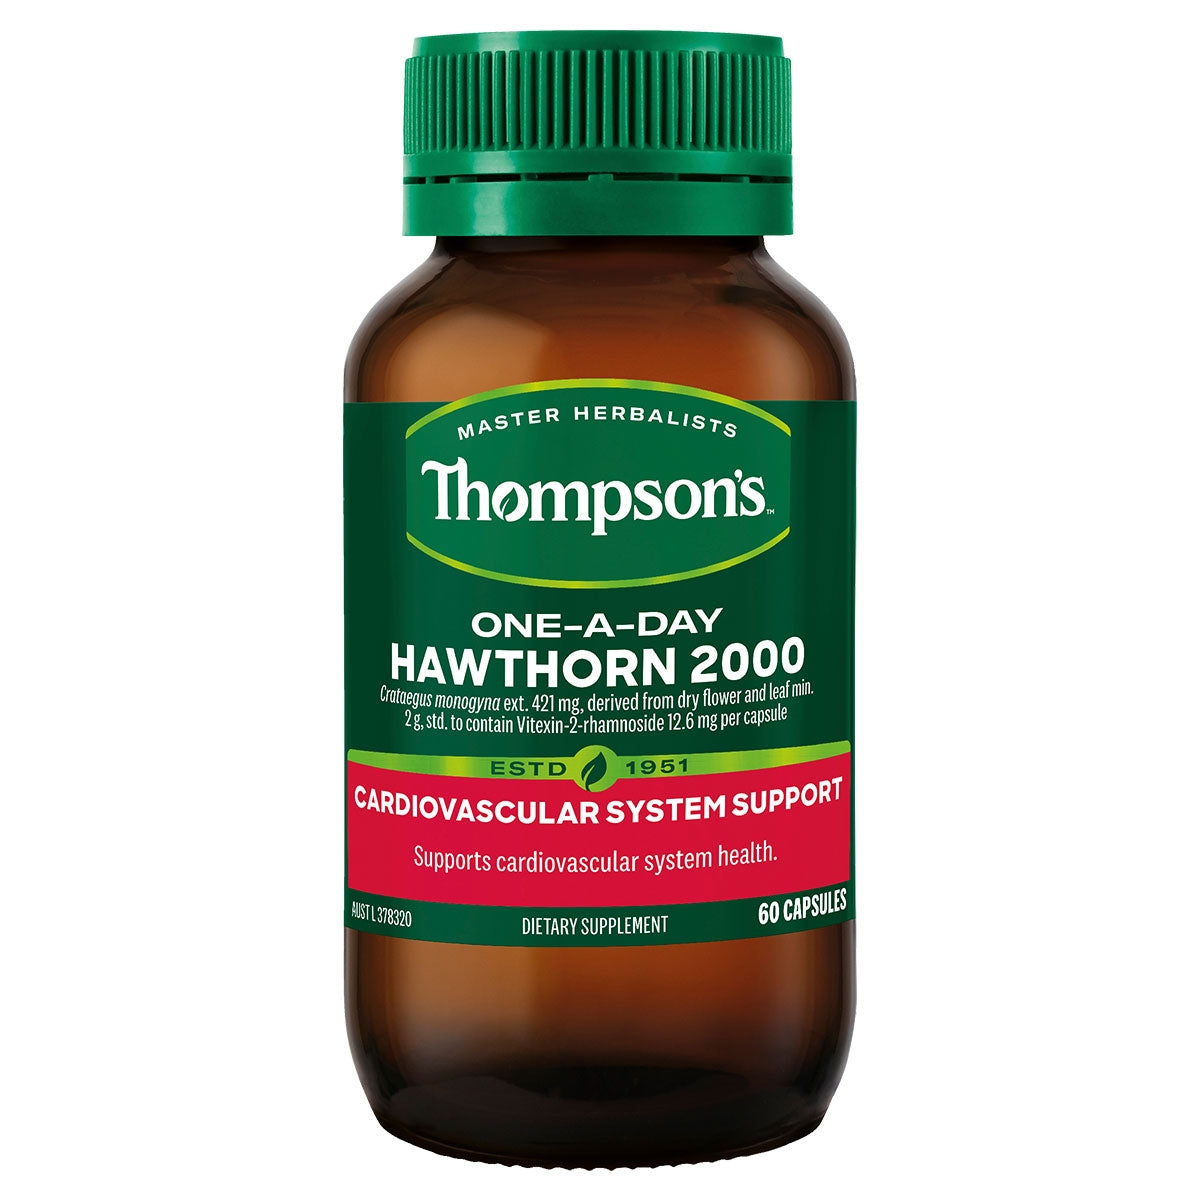 Thompsons One-a-day Hawthorn 2000mg 60 Capsules